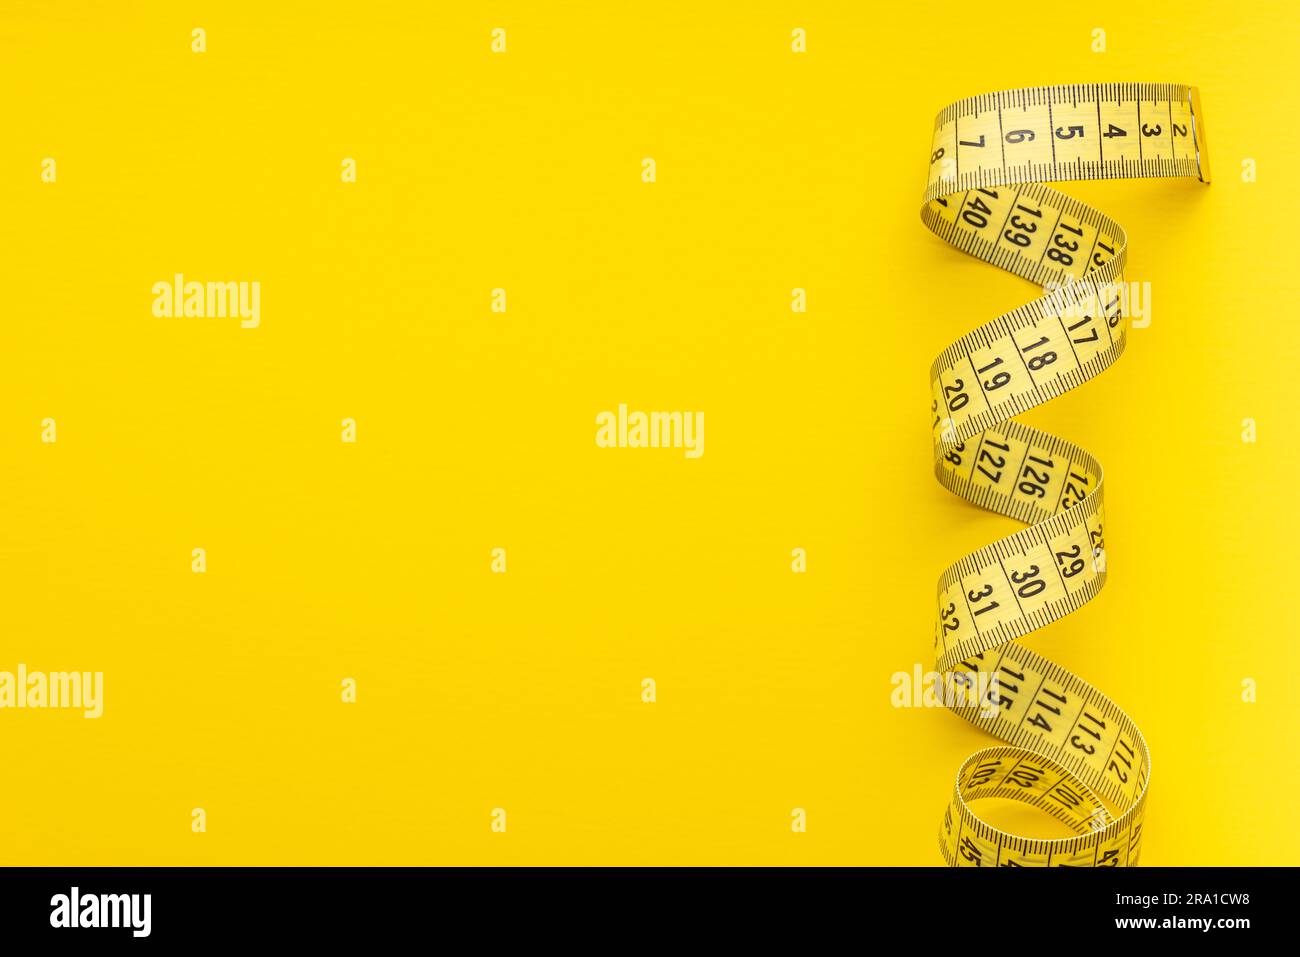 https://c8.alamy.com/comp/2RA1CW8/yellow-measuring-tape-on-the-yellow-background-top-view-2RA1CW8.jpg